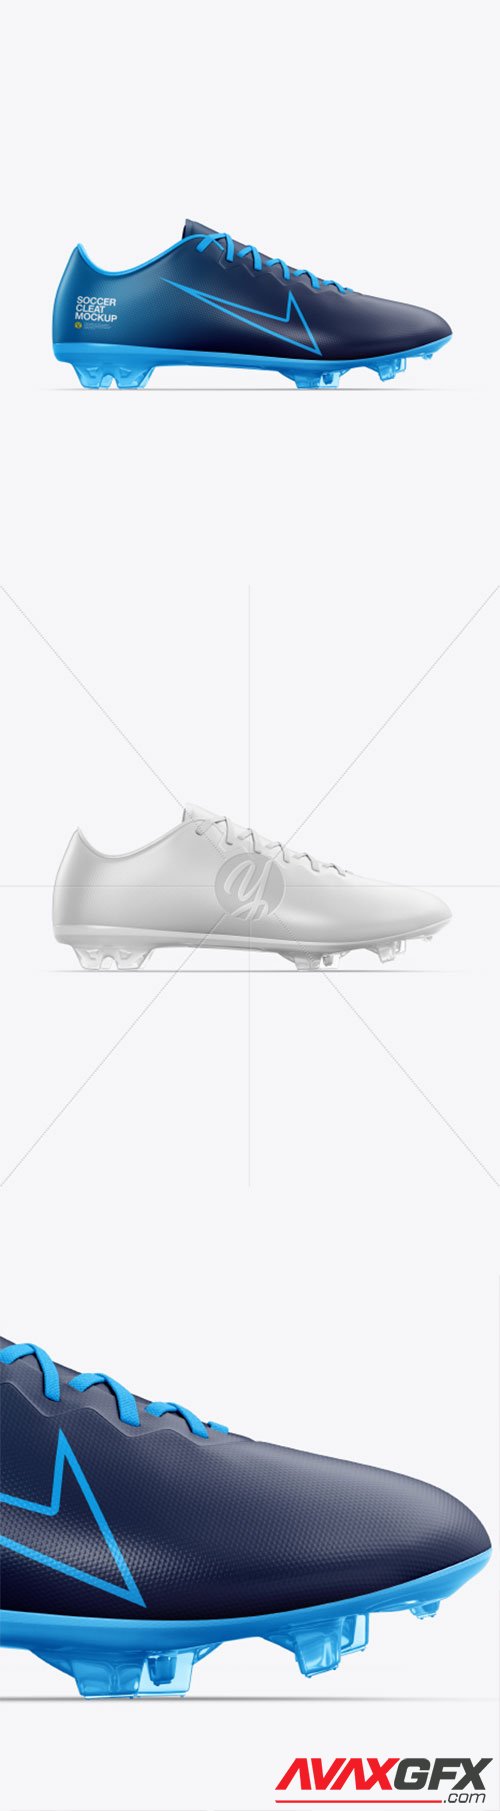 Soccer Cleat mockup (Side View) 38780